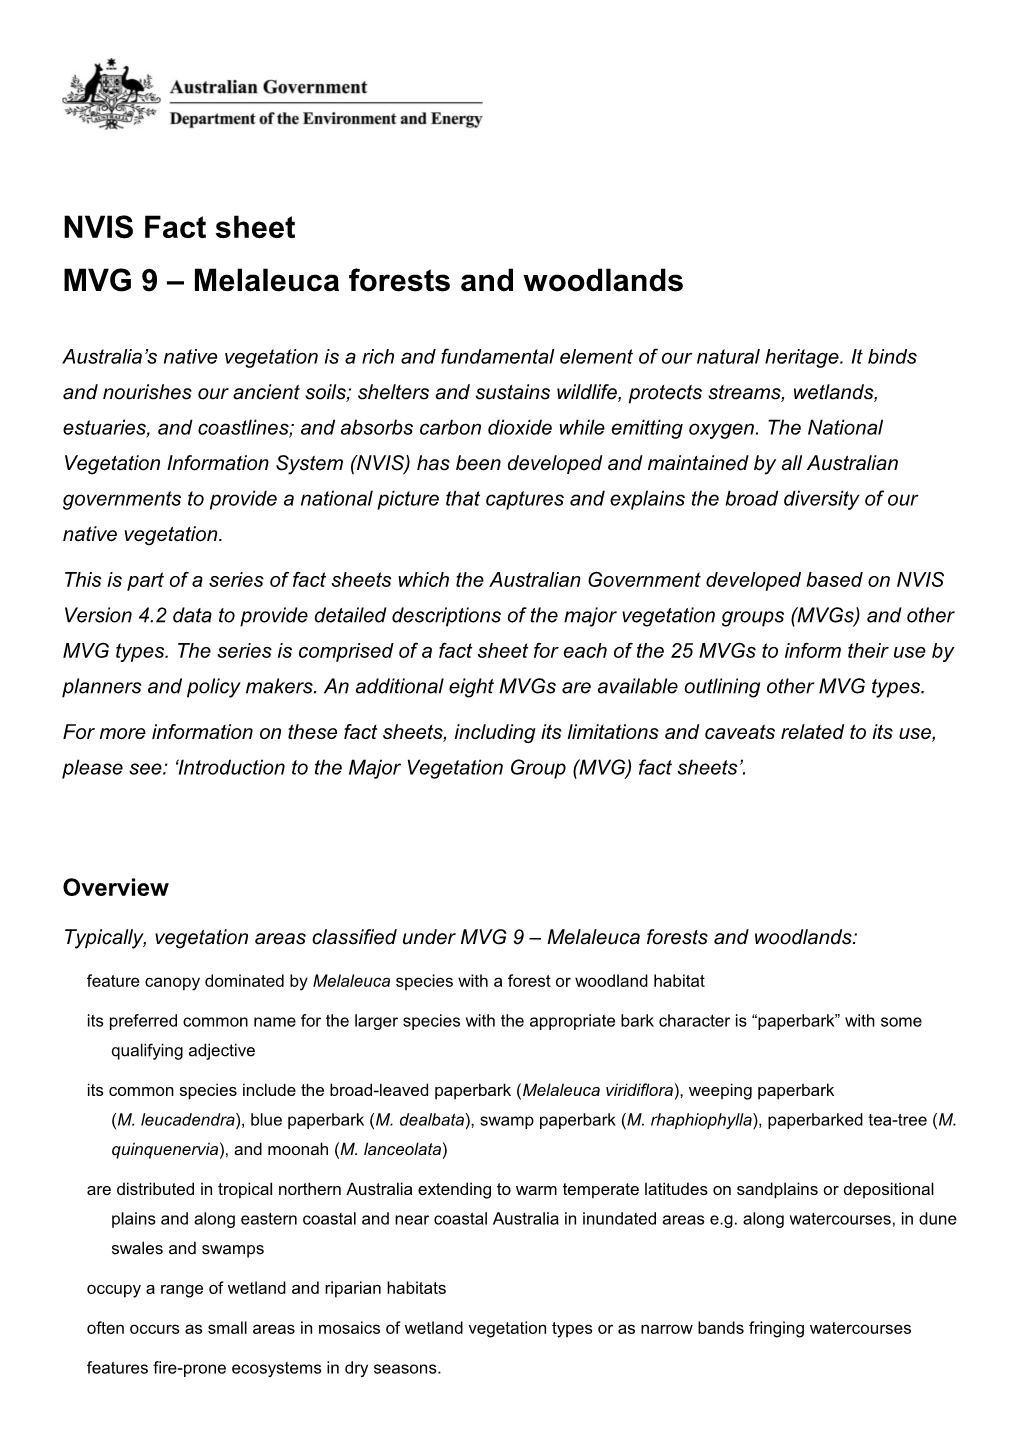 NVIS Fact Sheet MVG 9 Melaleuca Forests and Woodlands